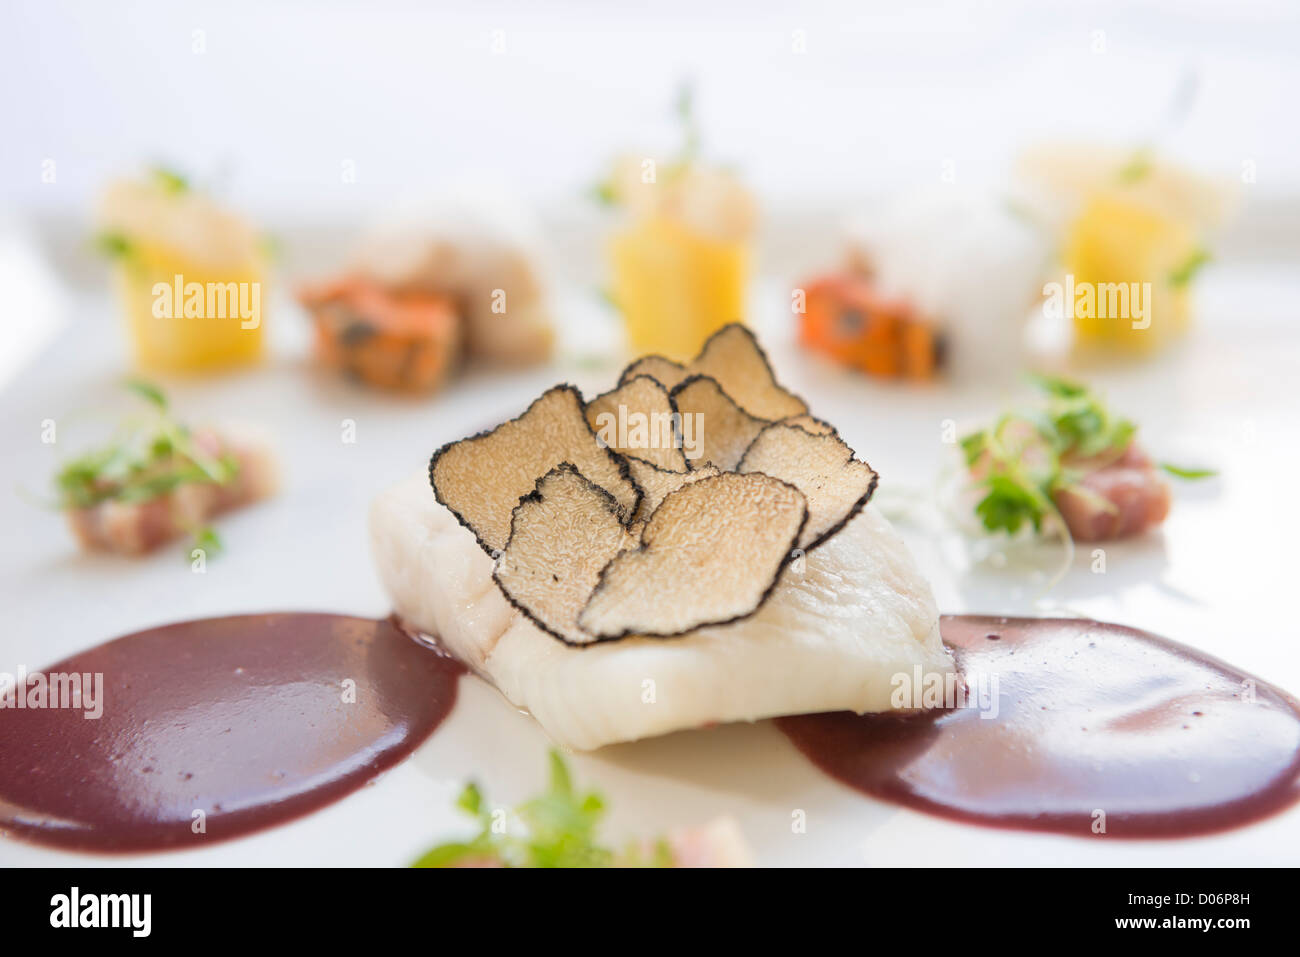 Fish dish plated in a fine dining restaurant Stock Photo - Alamy